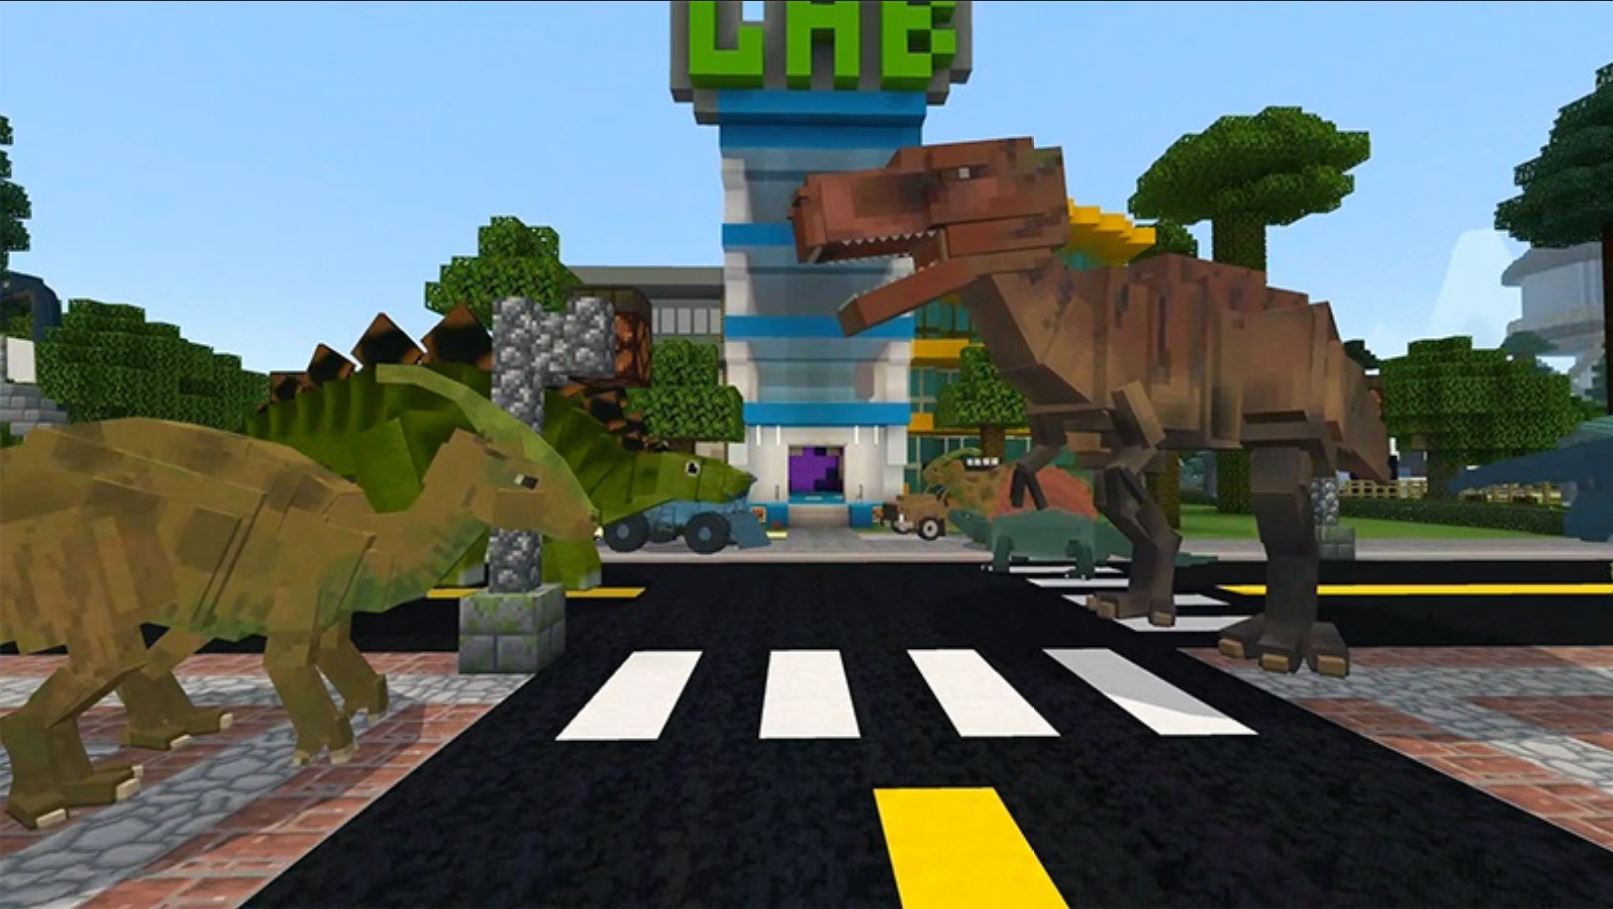 Minecraft Marketplace Explored: Rockett Adventures 1, A Different Way To Experience Dinosaurs In Minecraft